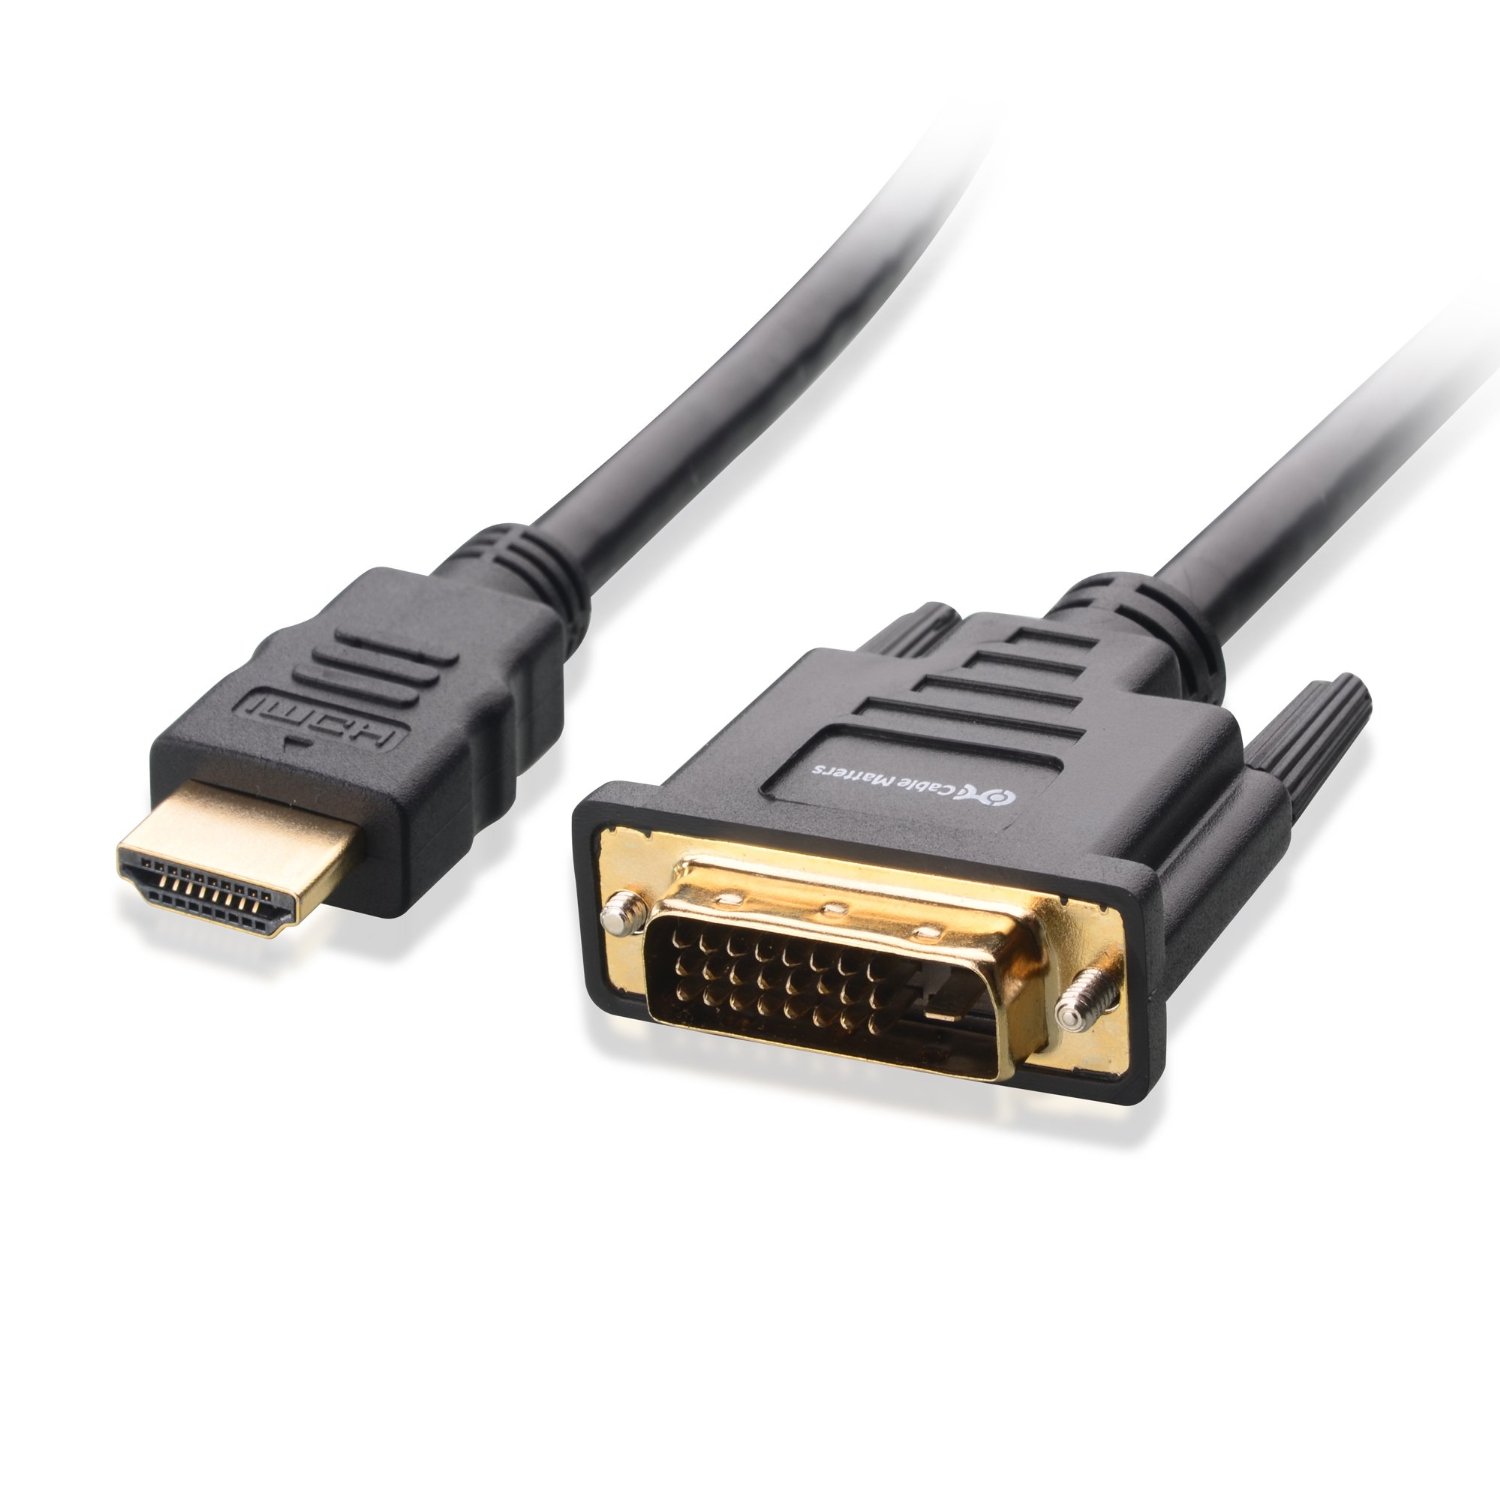 CABLE DVI-HDMI 4MTS